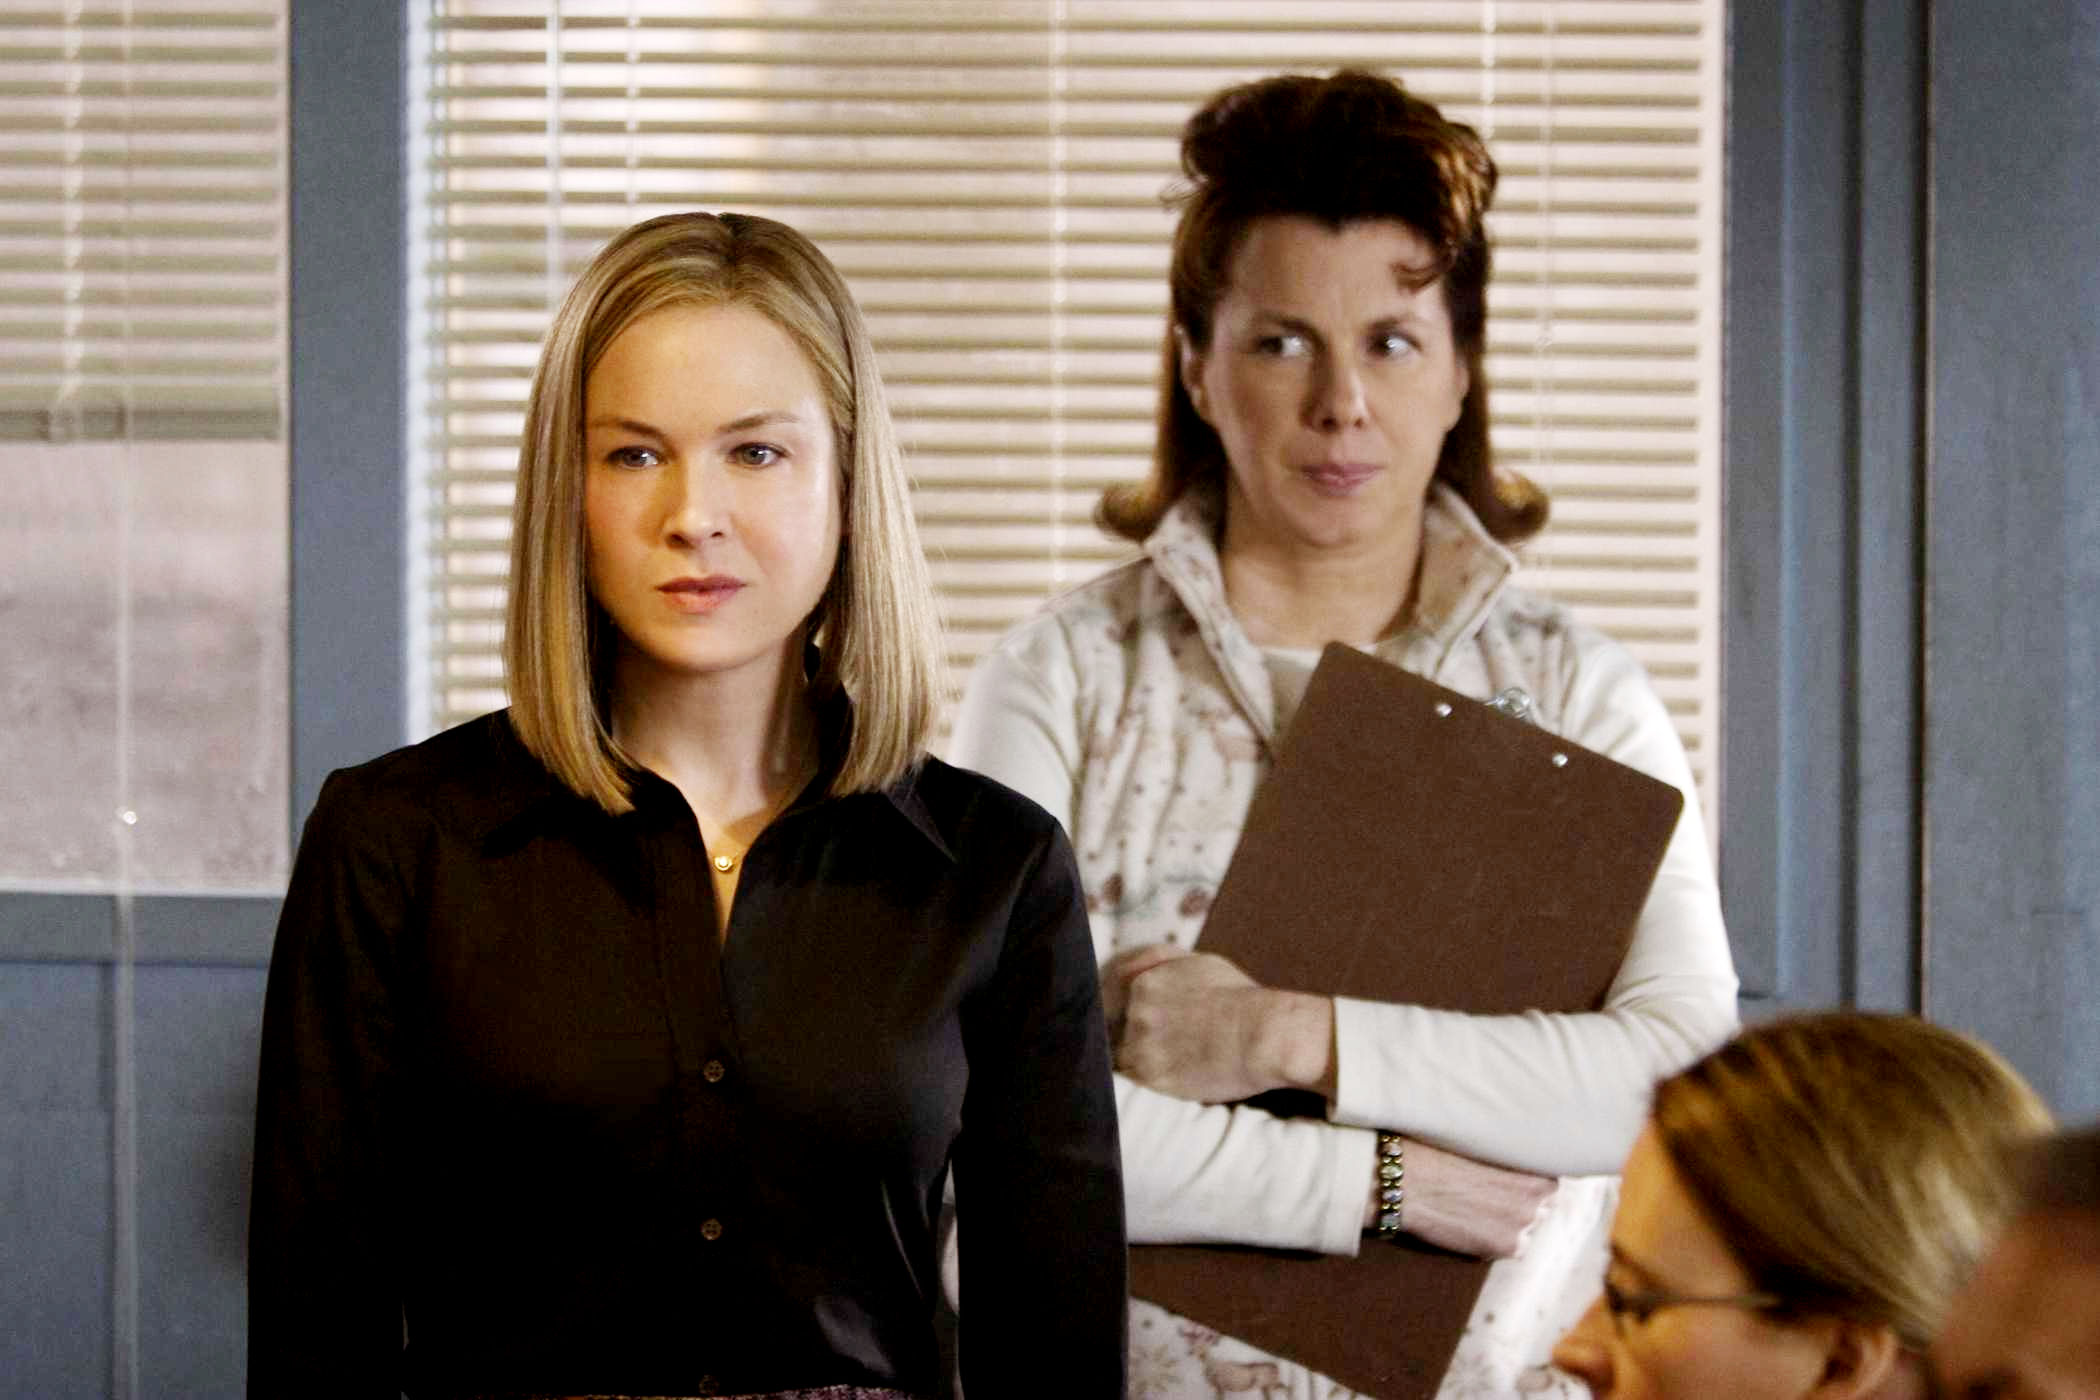 Renee Zellweger stars as Lucy Hill and Siobhan Fallon stars as Blanche Gunderson in Lionsgate Films' New in Town (2009). Photo credit by Rebecca Sandulak.